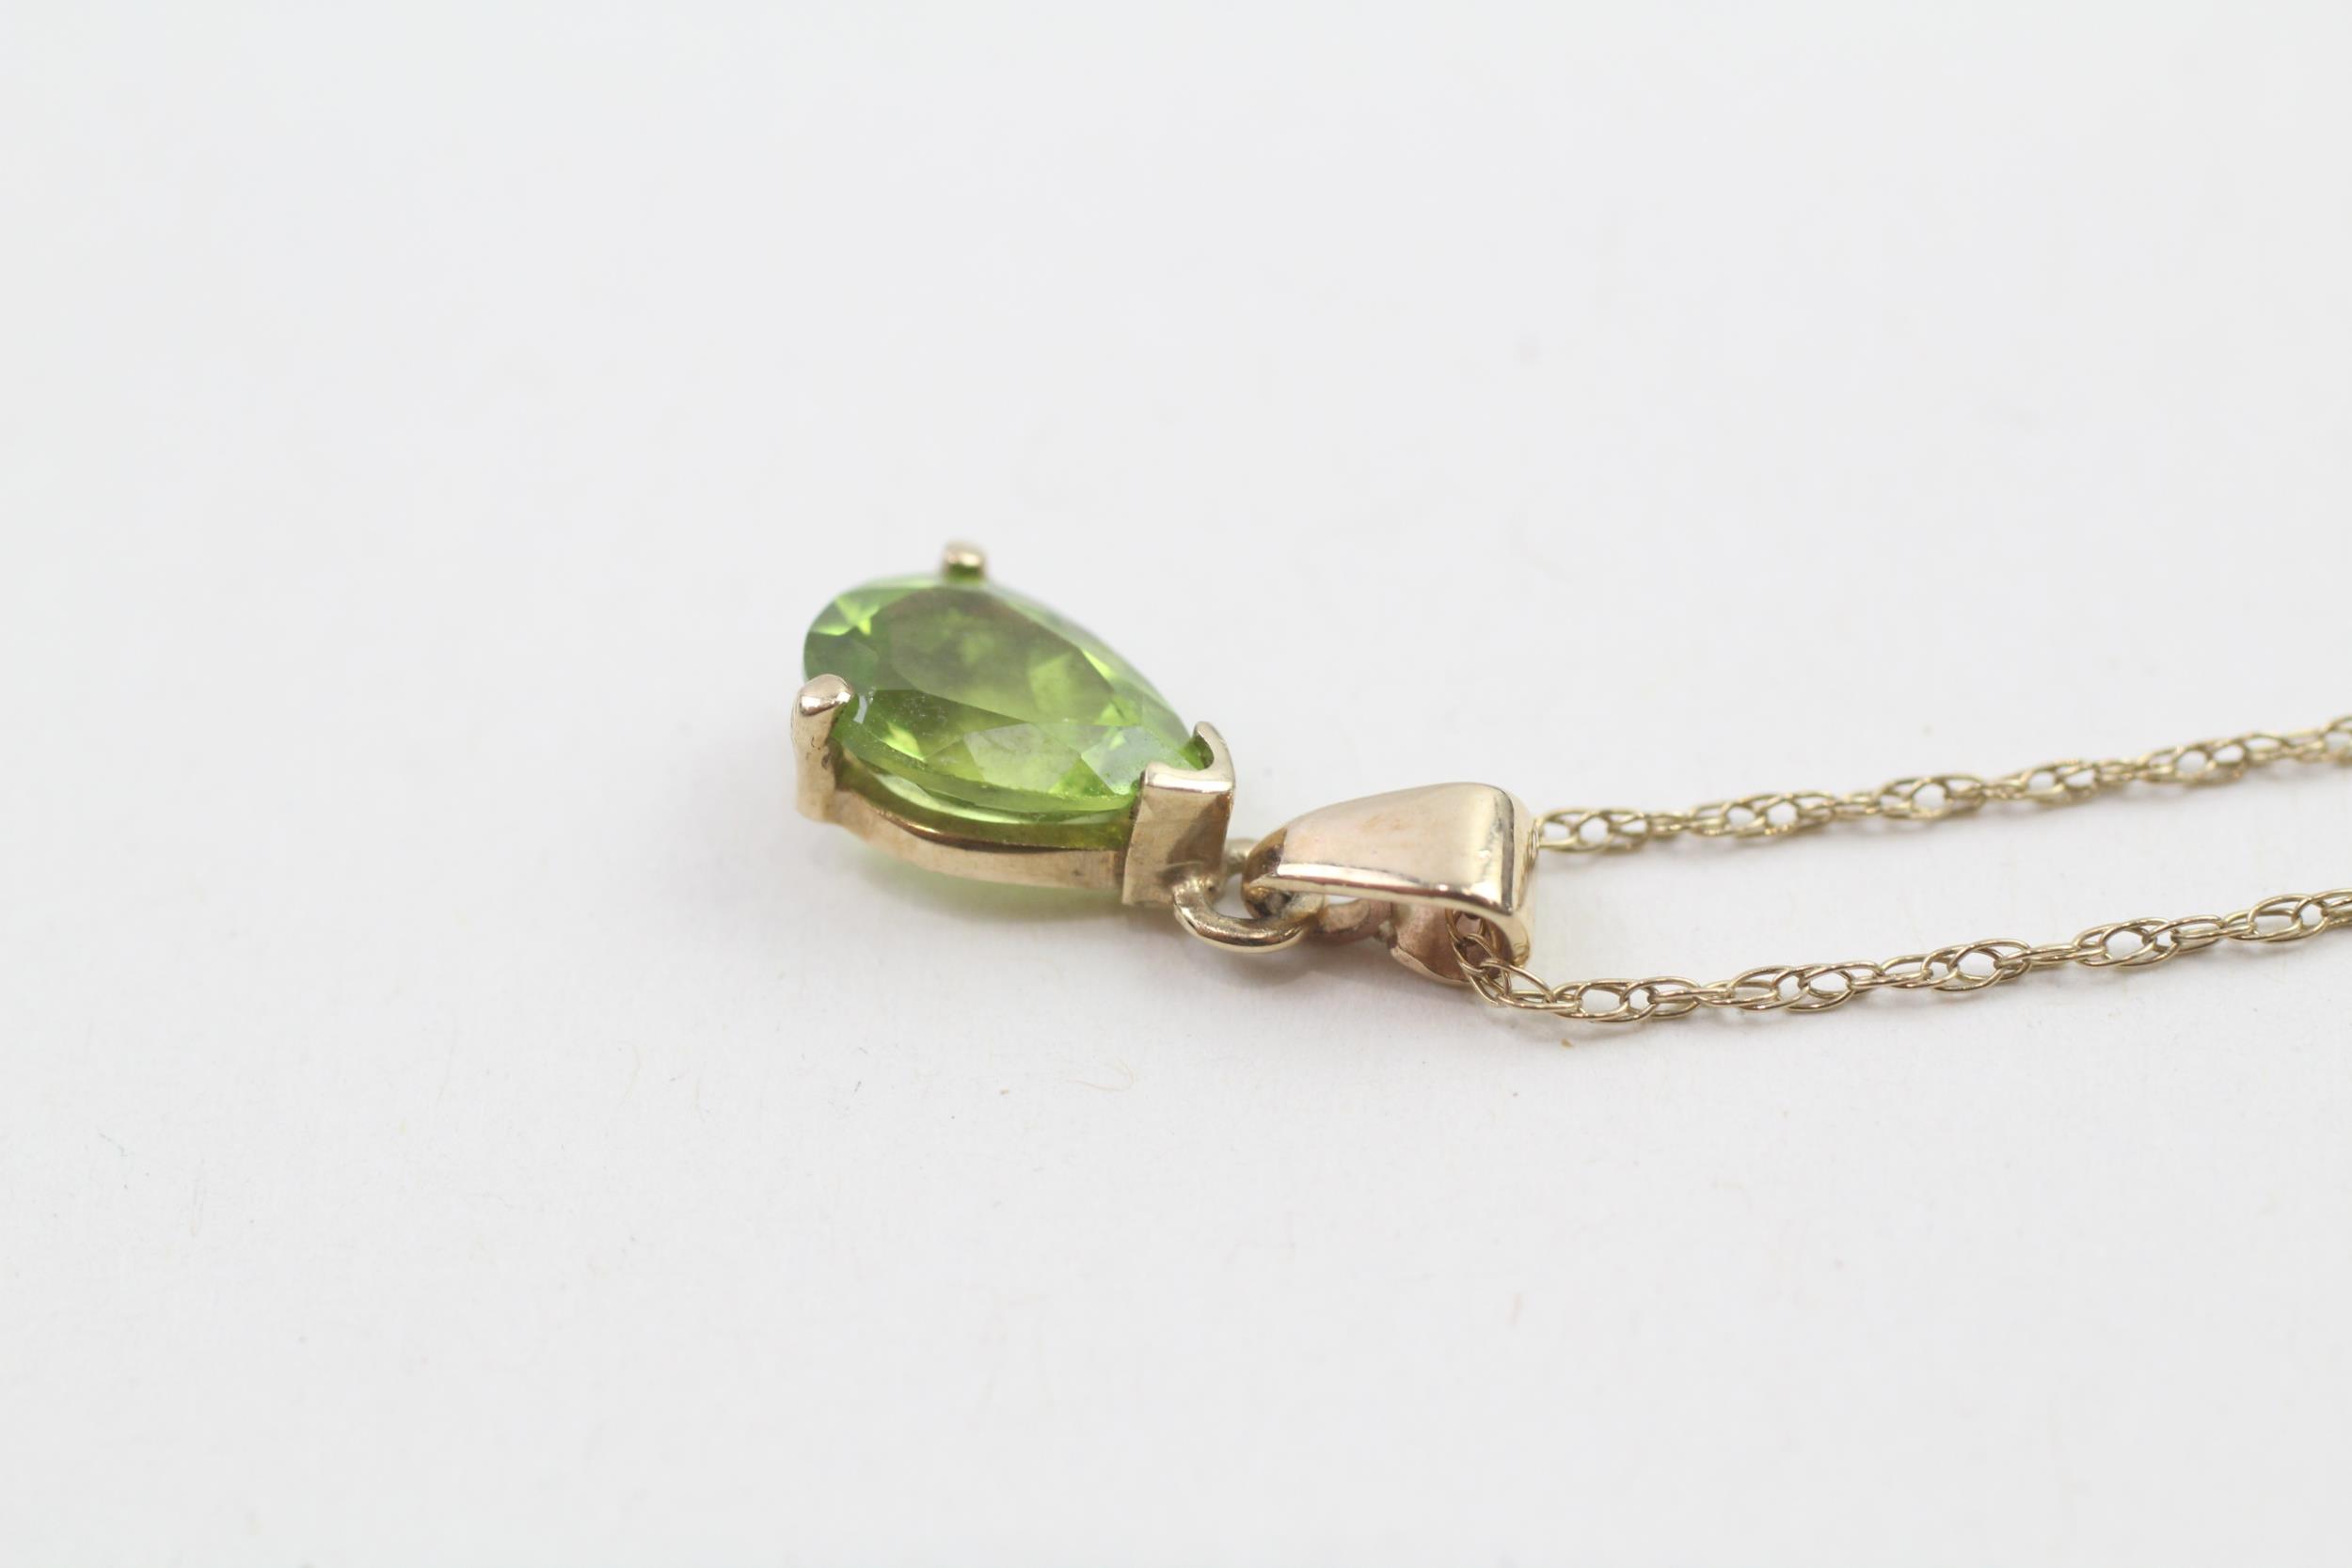 9ct gold pear-cut peridot pendant necklace (1.5g) - Image 2 of 4